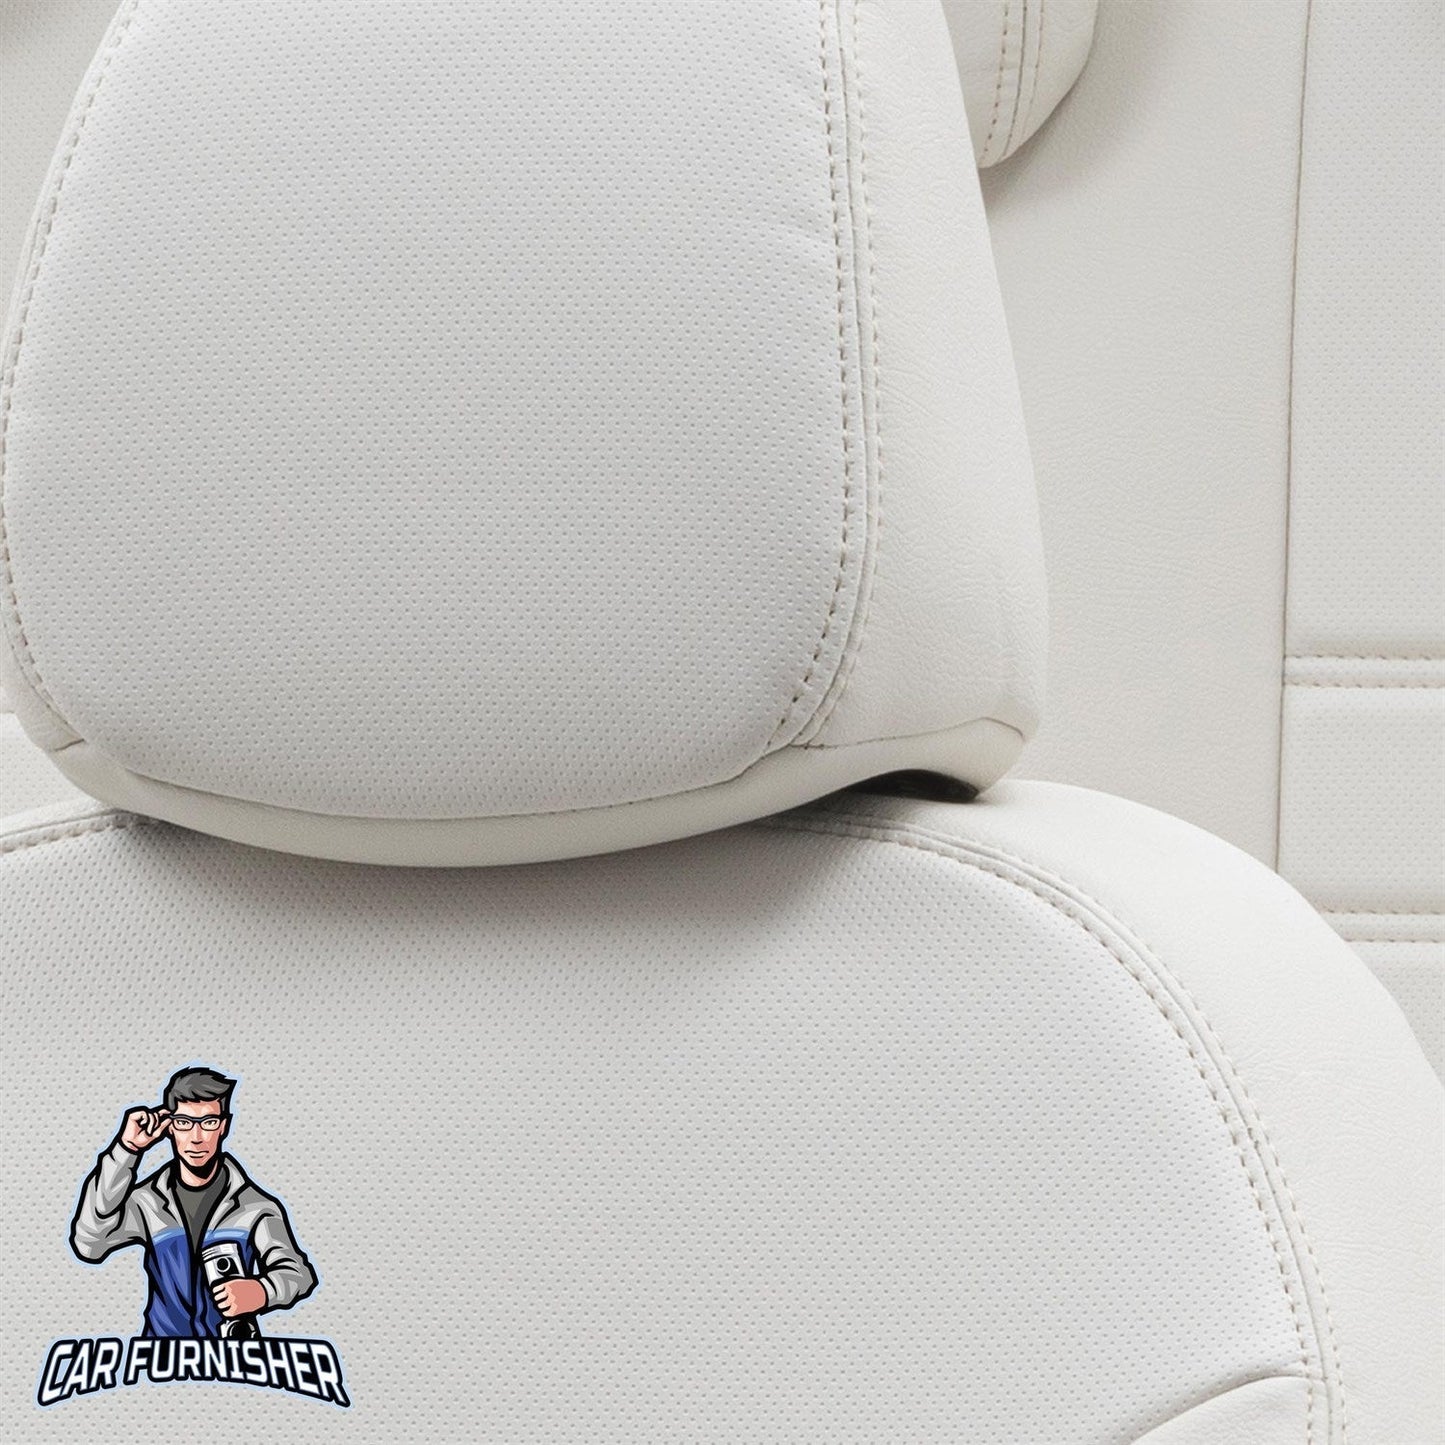 Hyundai H-200 Seat Covers Istanbul Leather Design Ivory Leather